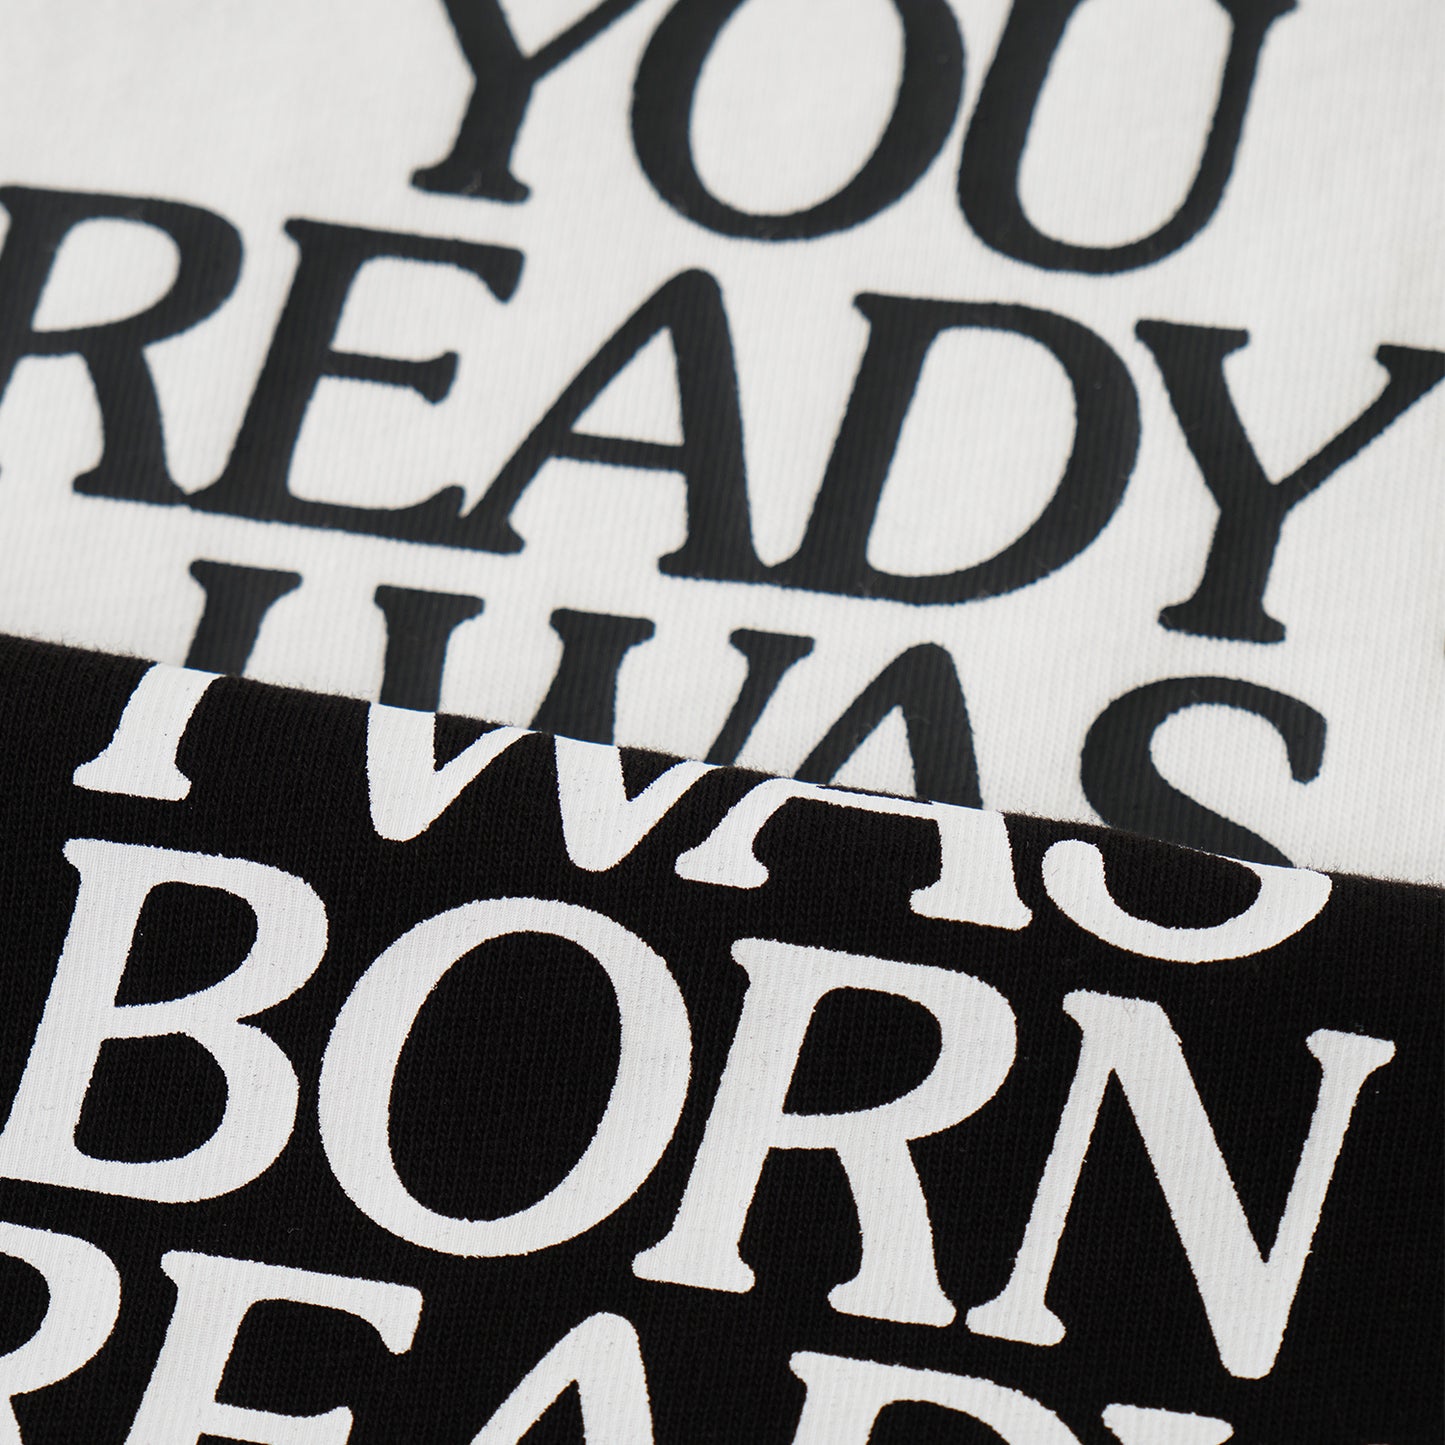 ARE YOU READY? TEE